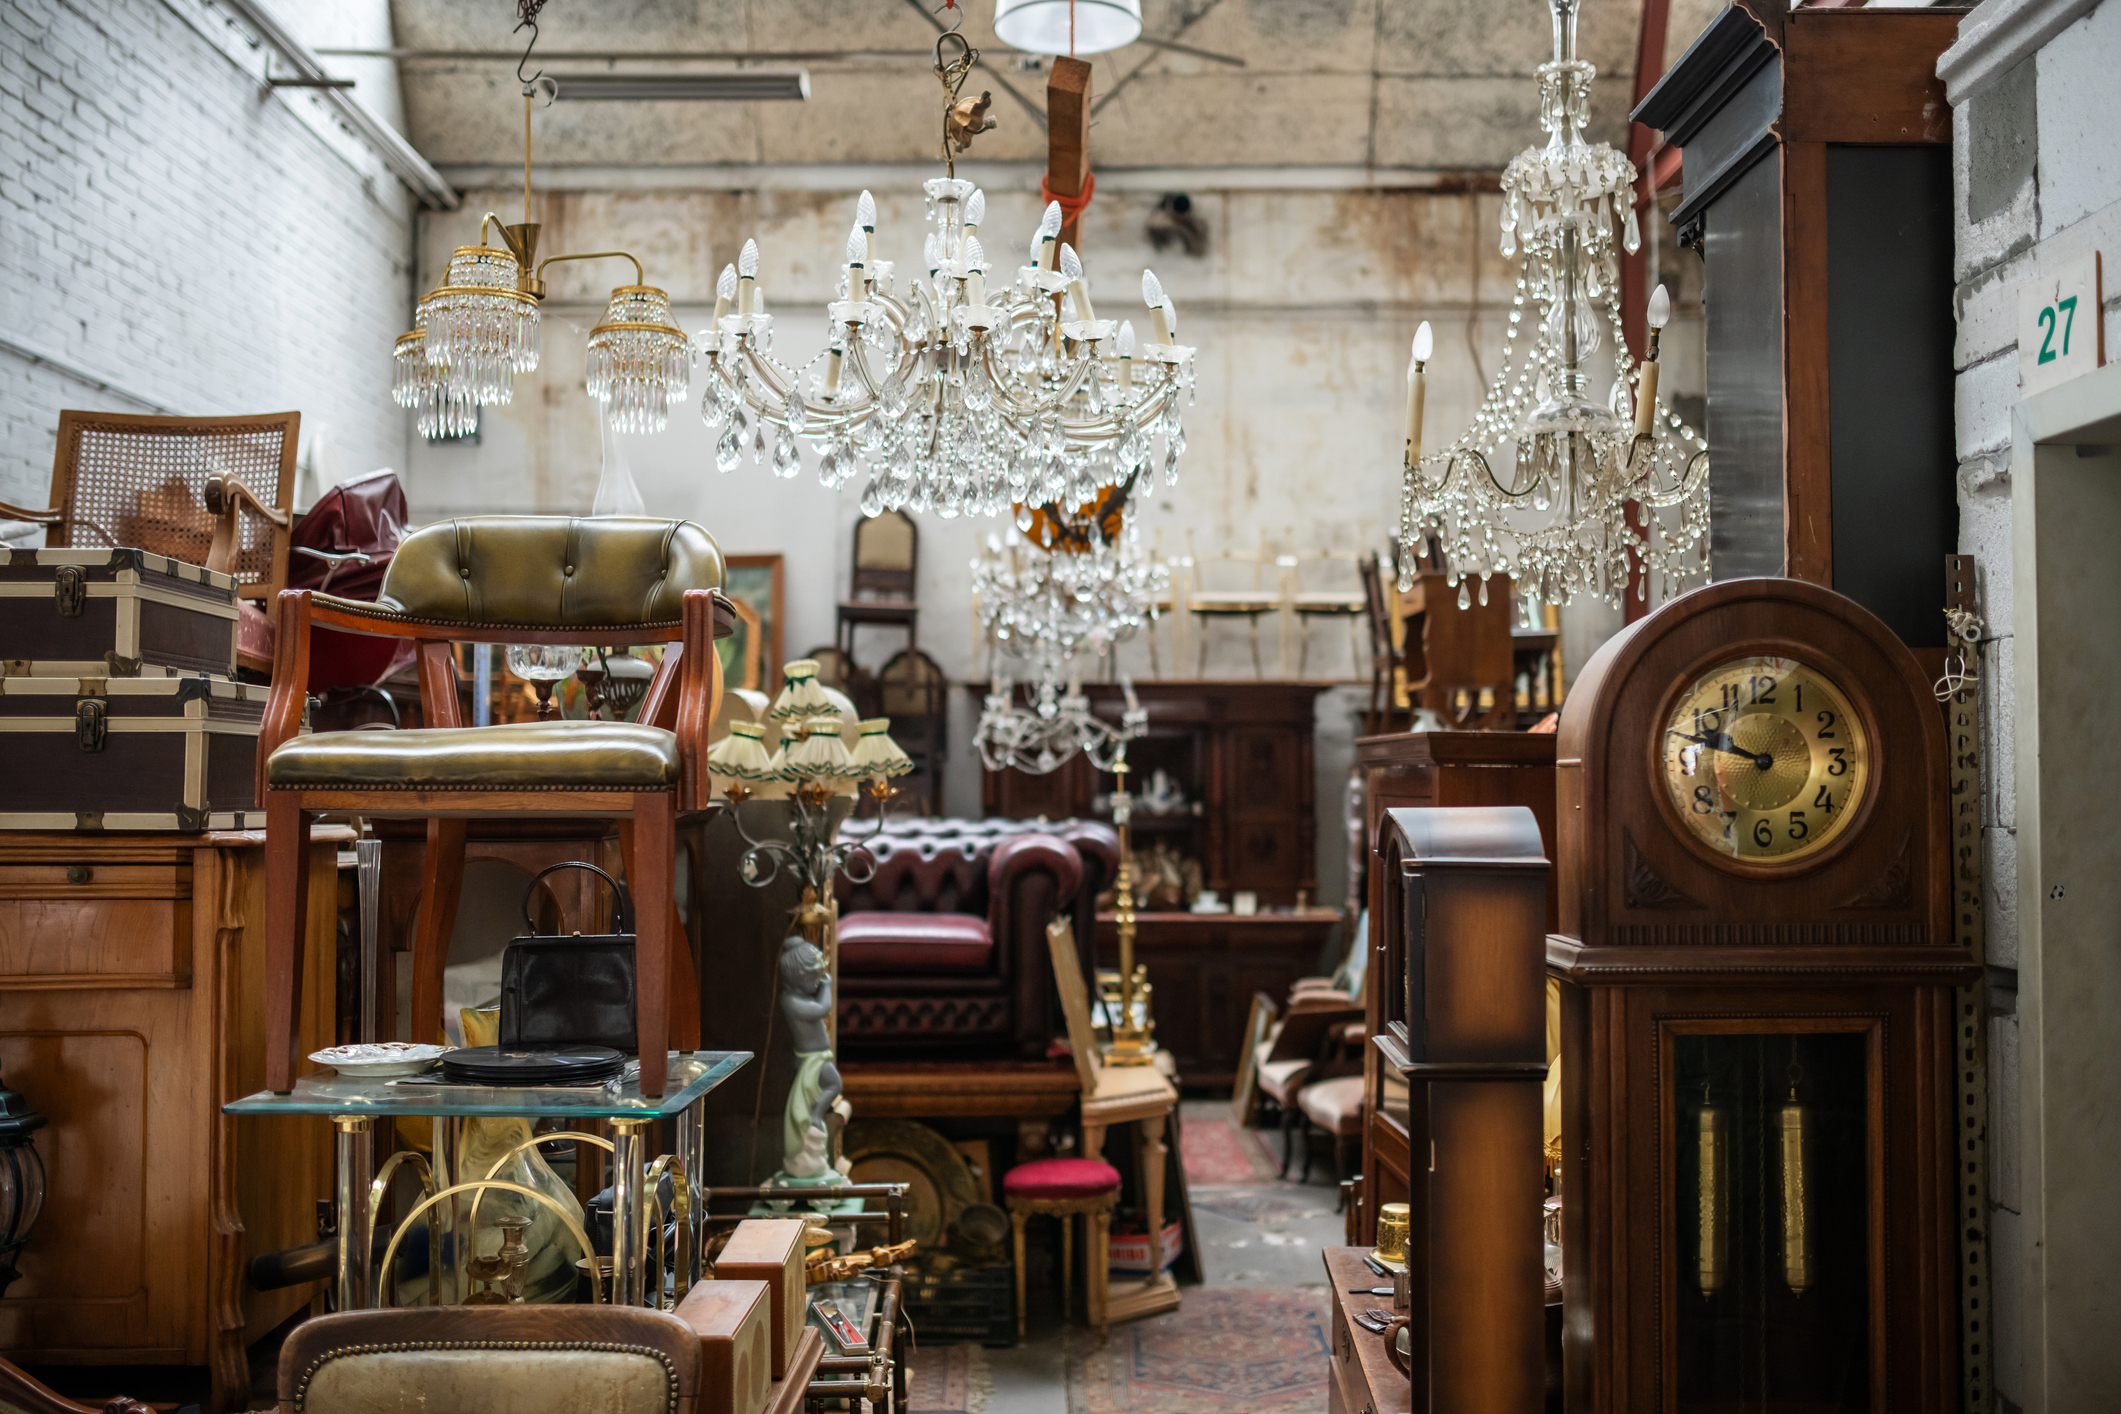 An antique shop interior with various furniture items, chandeliers, and a grandfather clock